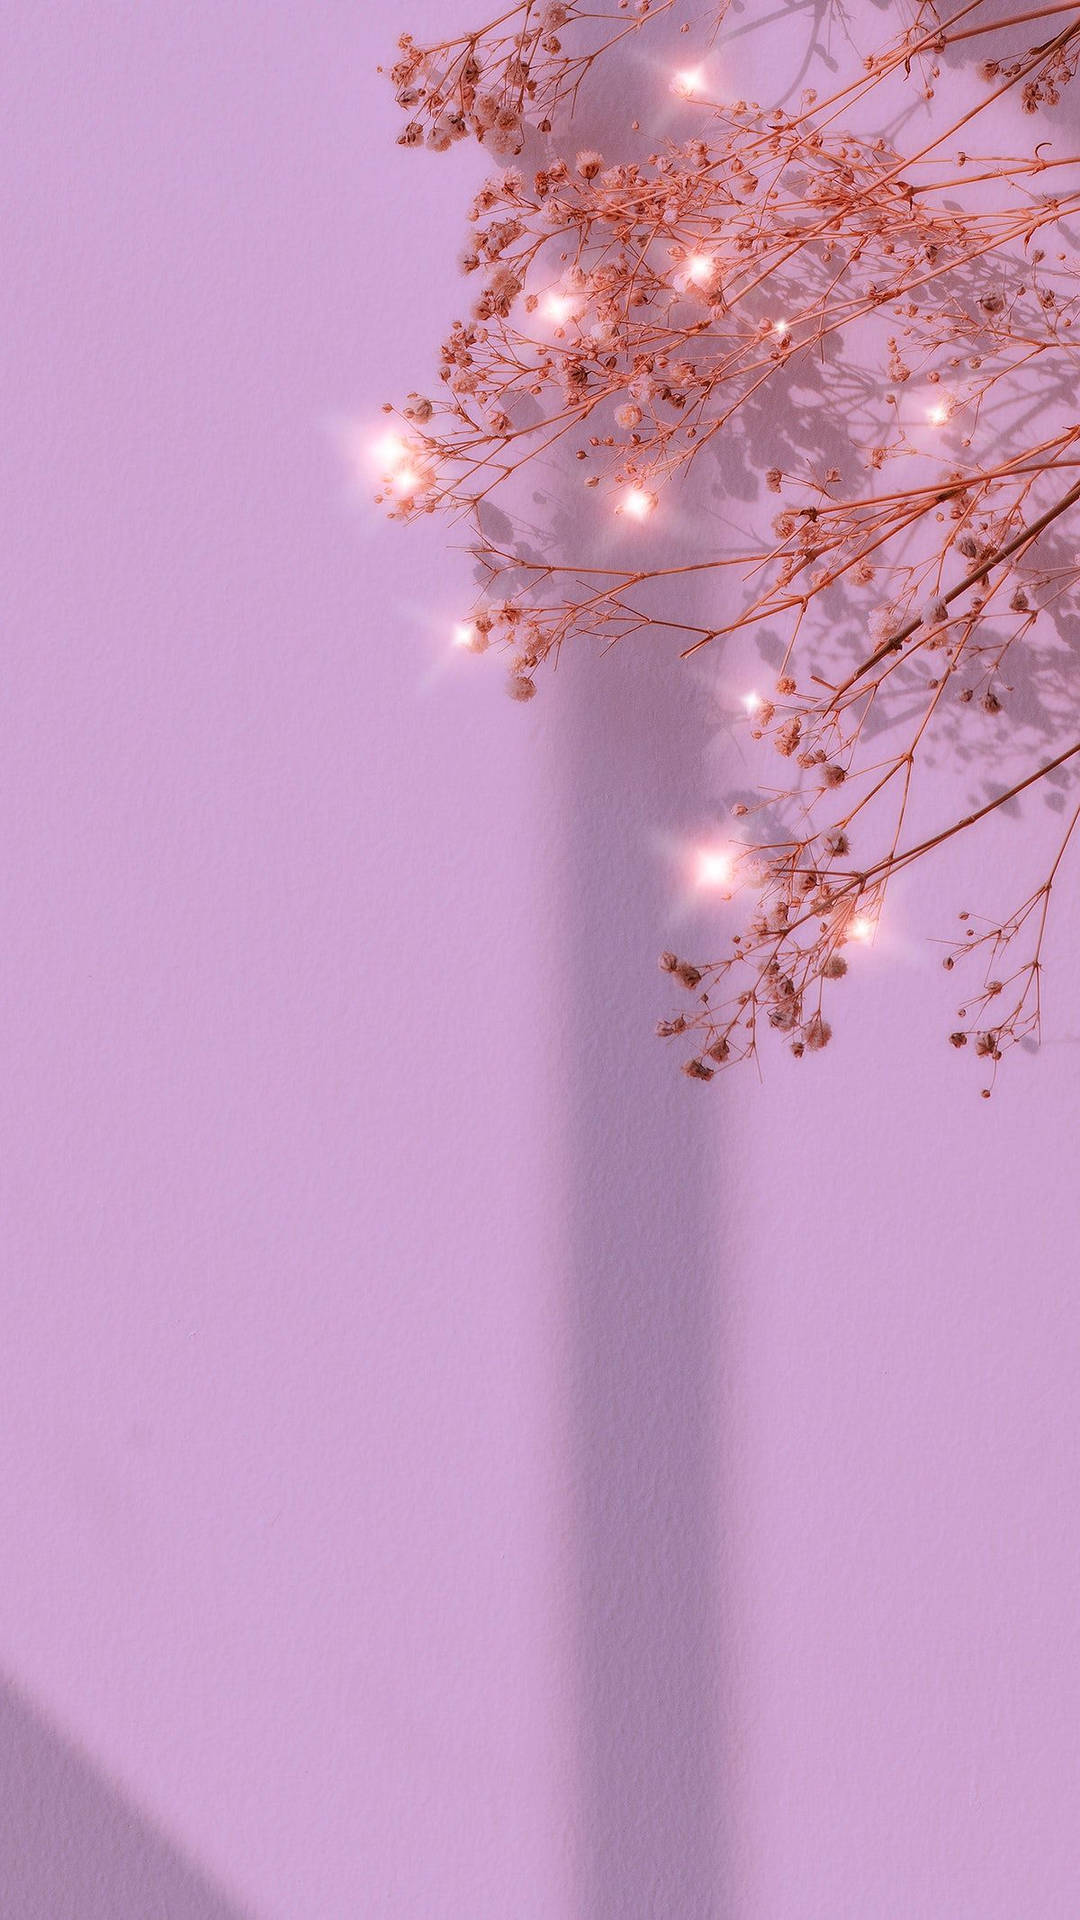 A Tree With A Pink Wall Wallpaper